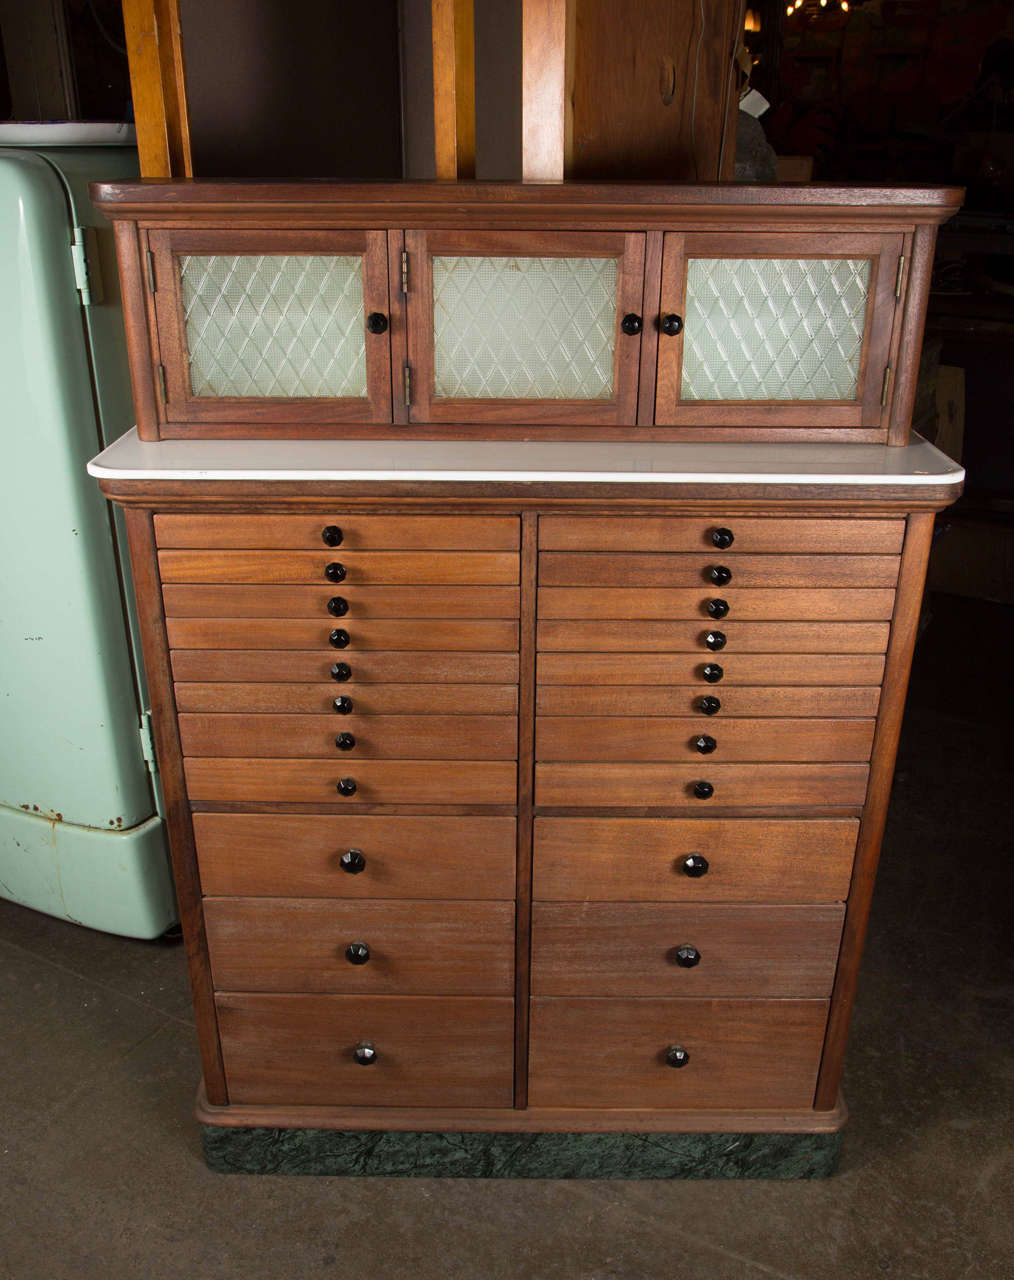 1920s three-door wooden cabinet with original matching black pulls, textured glass, numerous drawers and six larger storage drawers near the bottom. This can be seen at our 1800 South Grand Ave location in Downtown Los Angeles.